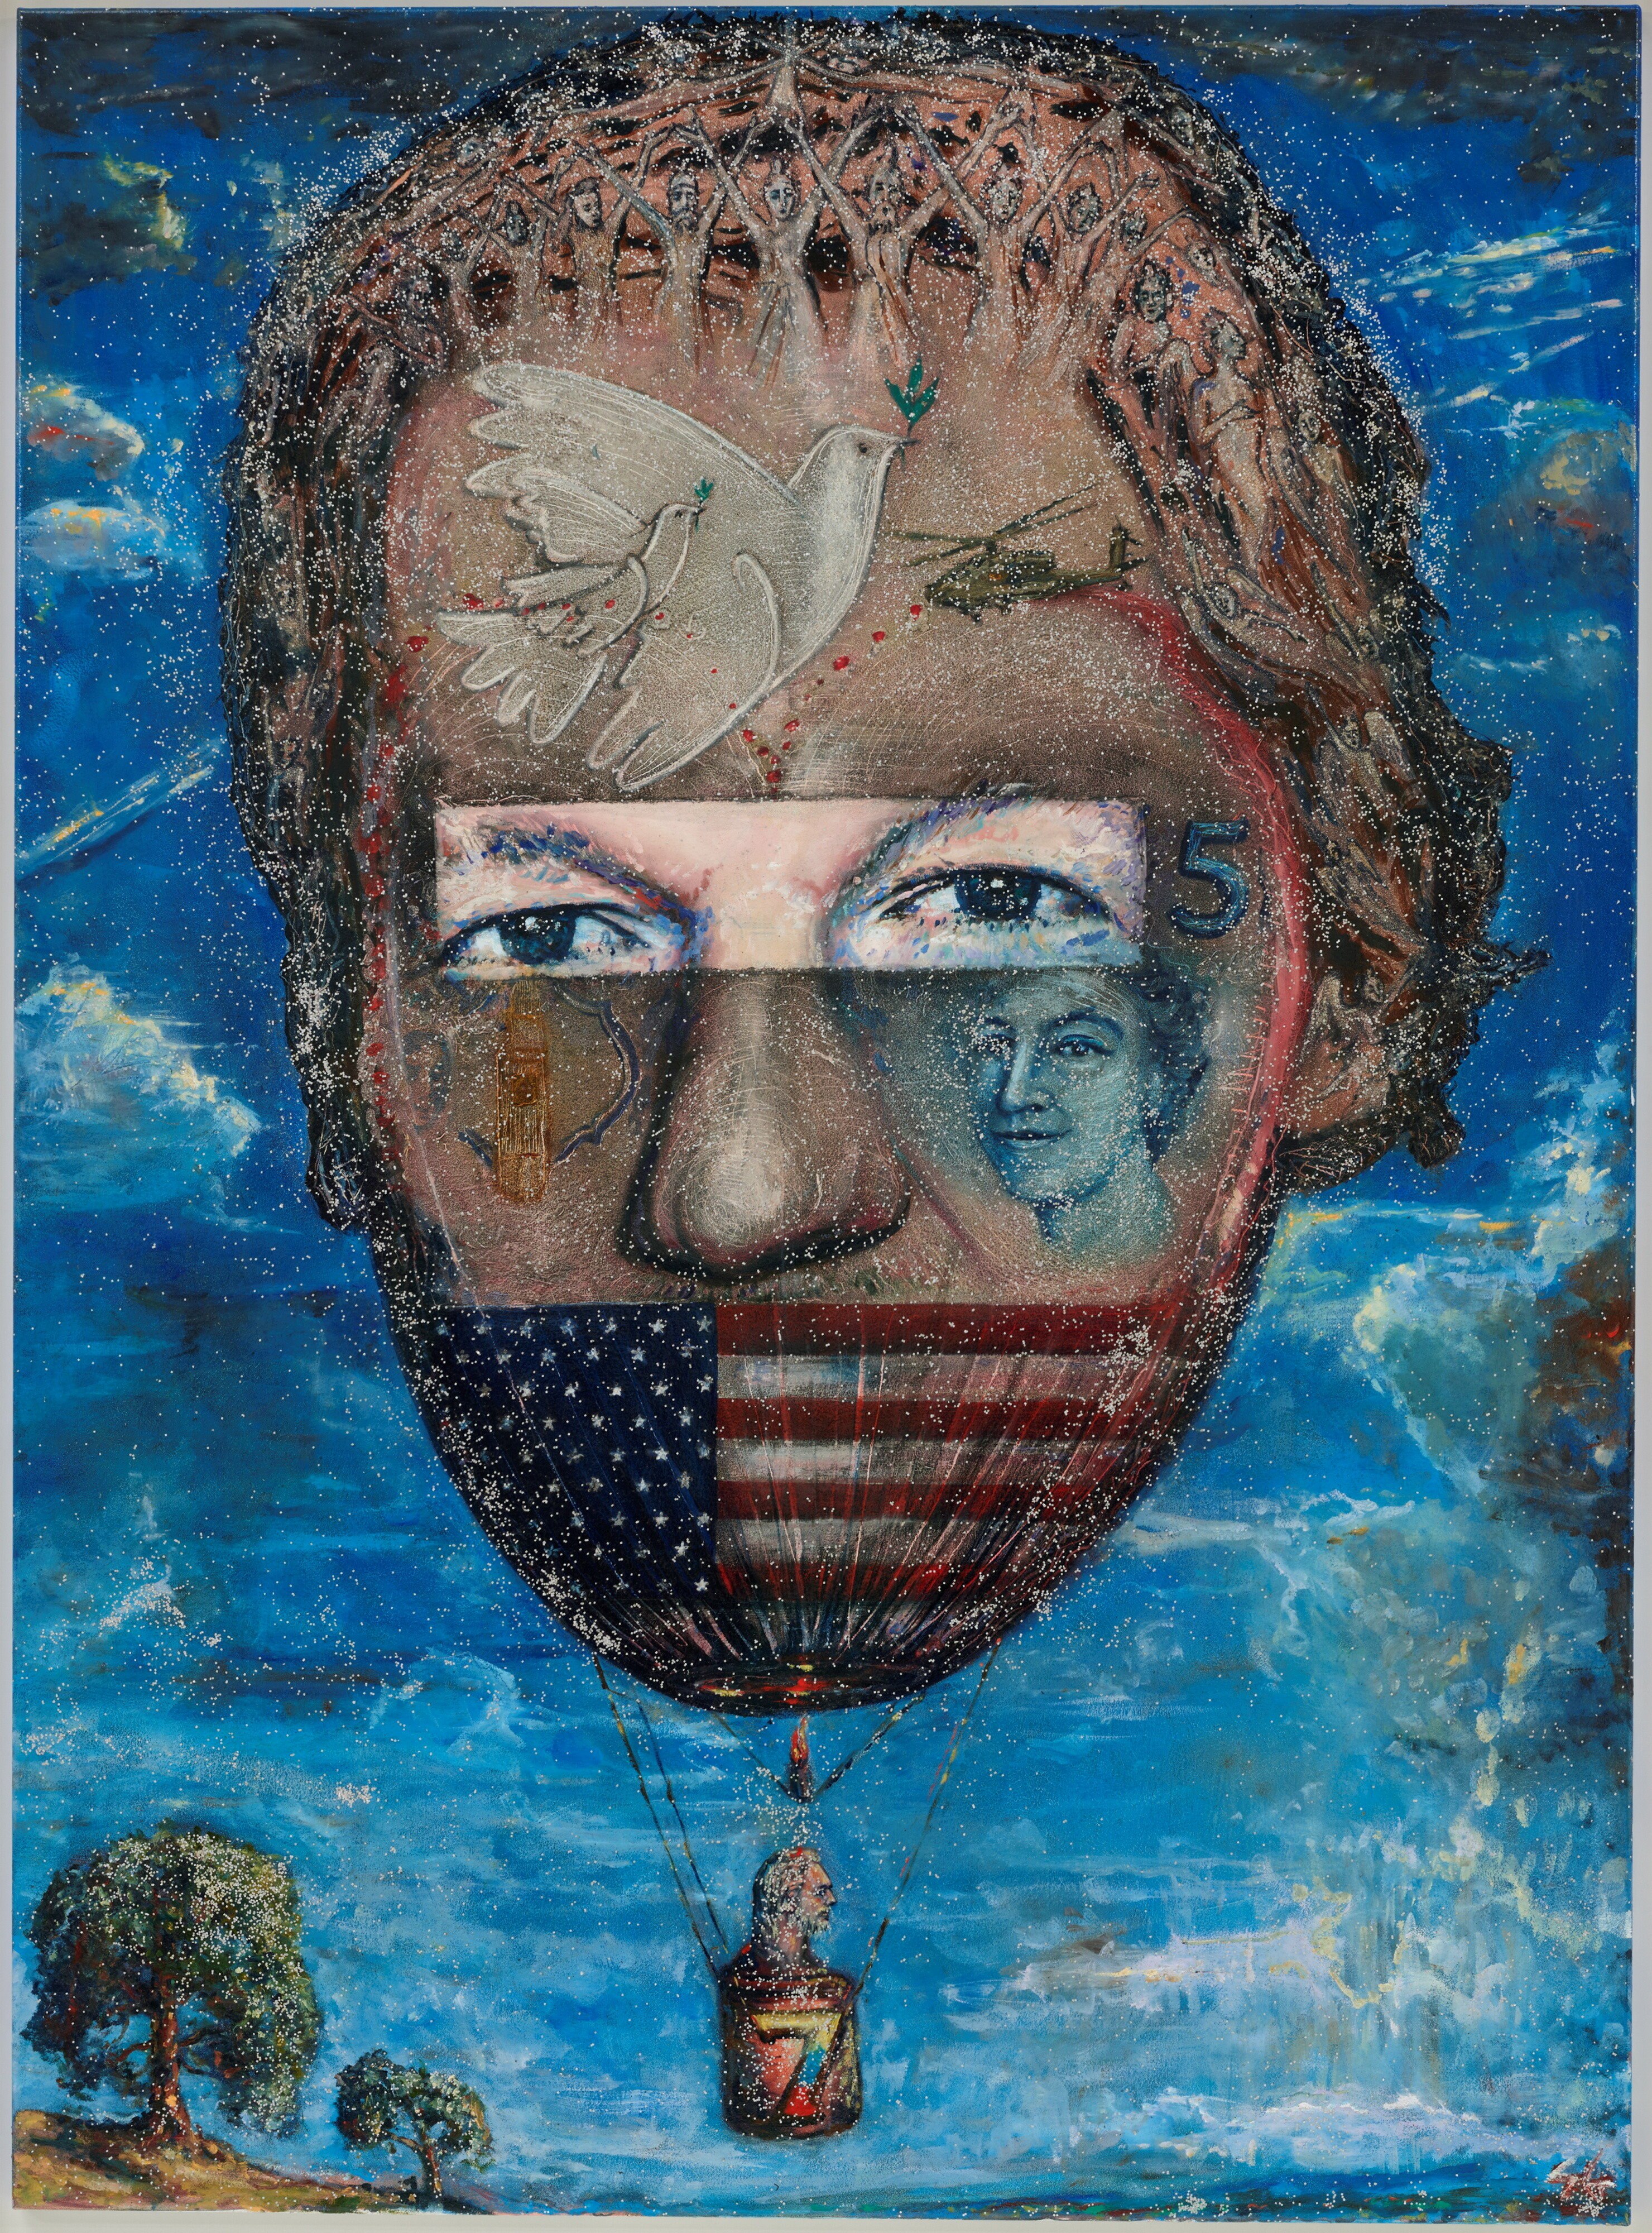 A portrait of Julian Assange, depicted as a hot air baloon with a dove, an Australian $5 note and the US flag across his face.